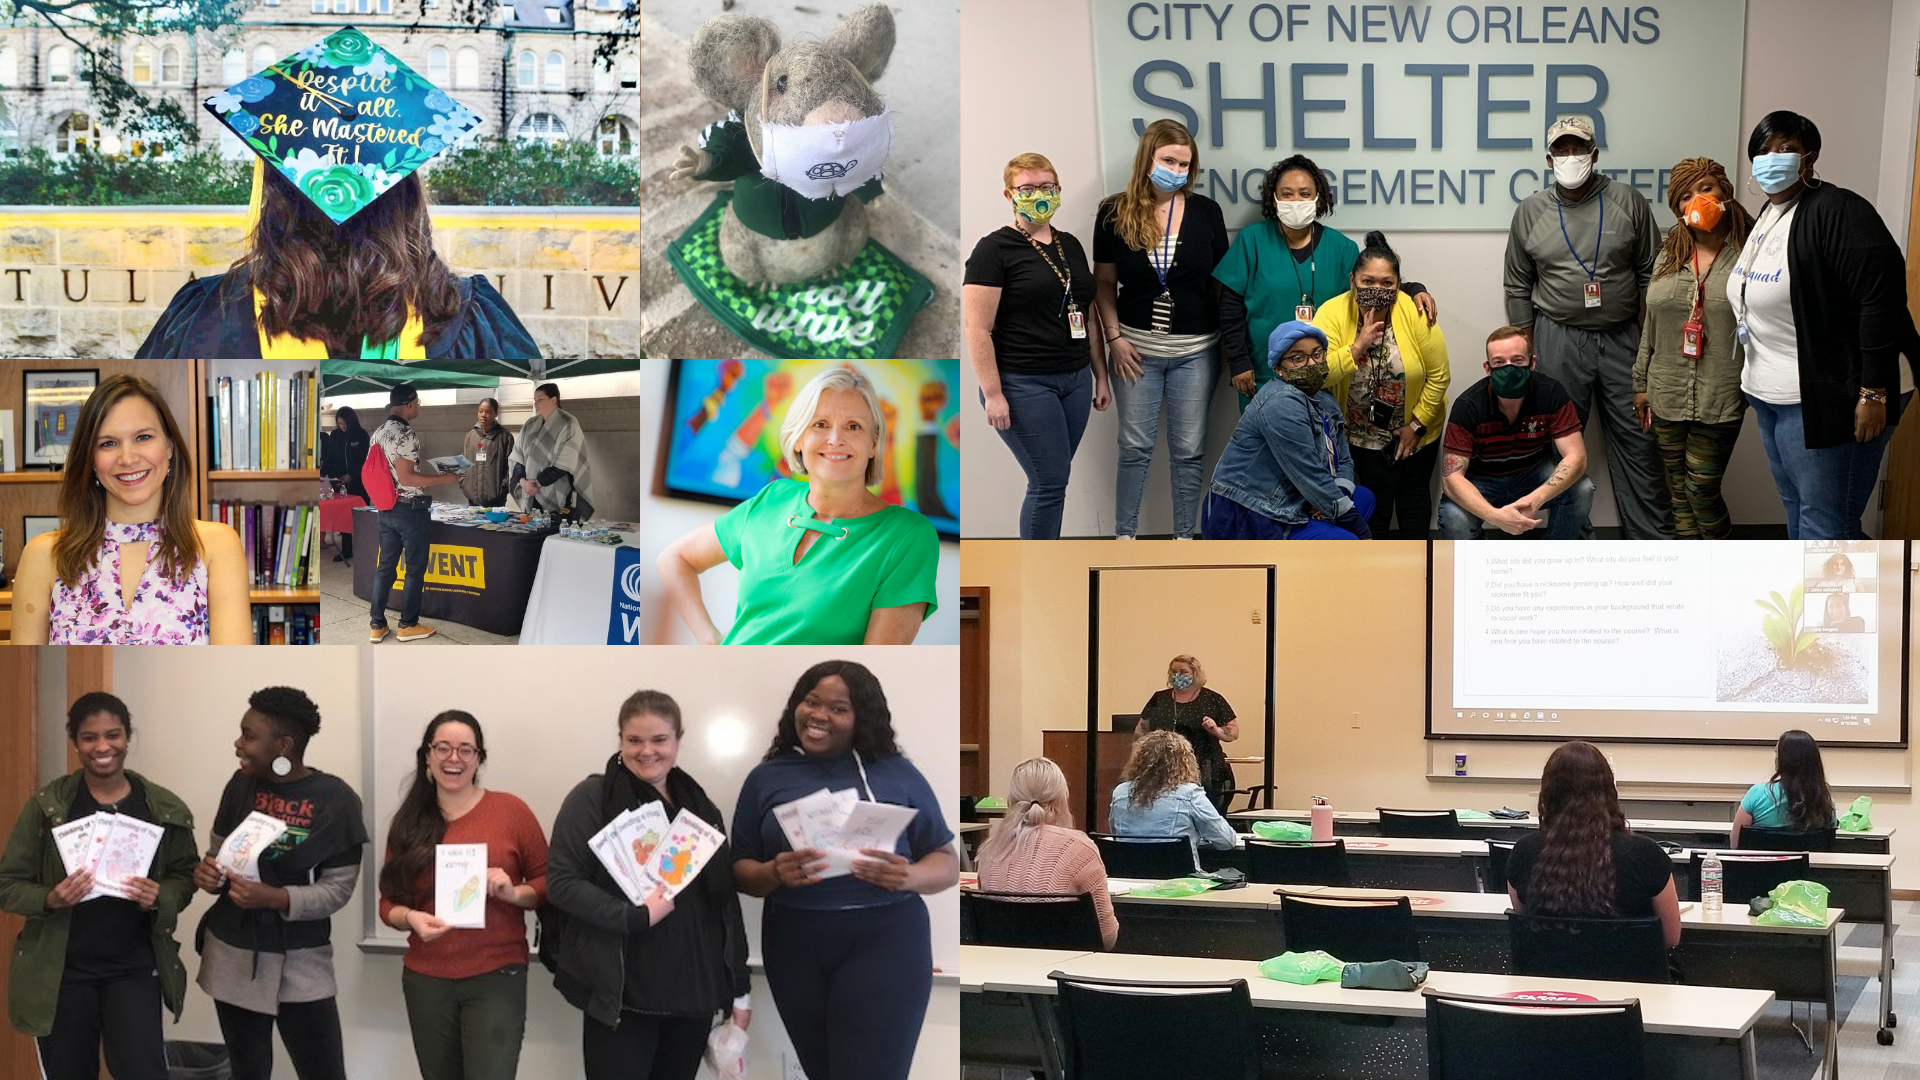 This collage of photos includes a woman wearing a mortar board that reads "despite it all, she mastered it," a stuffed mouse, a group of people standing in front of a sign that reads "City of New Orleans Shelter & Engagement Center," a group of students seated in a social distanced classroom while a professor lectures, a group of students holding up Valentine's cards and laughing, a smiling woman in front of a bookshelf, two people talking with another person around a table under a tent, and a smiling woman